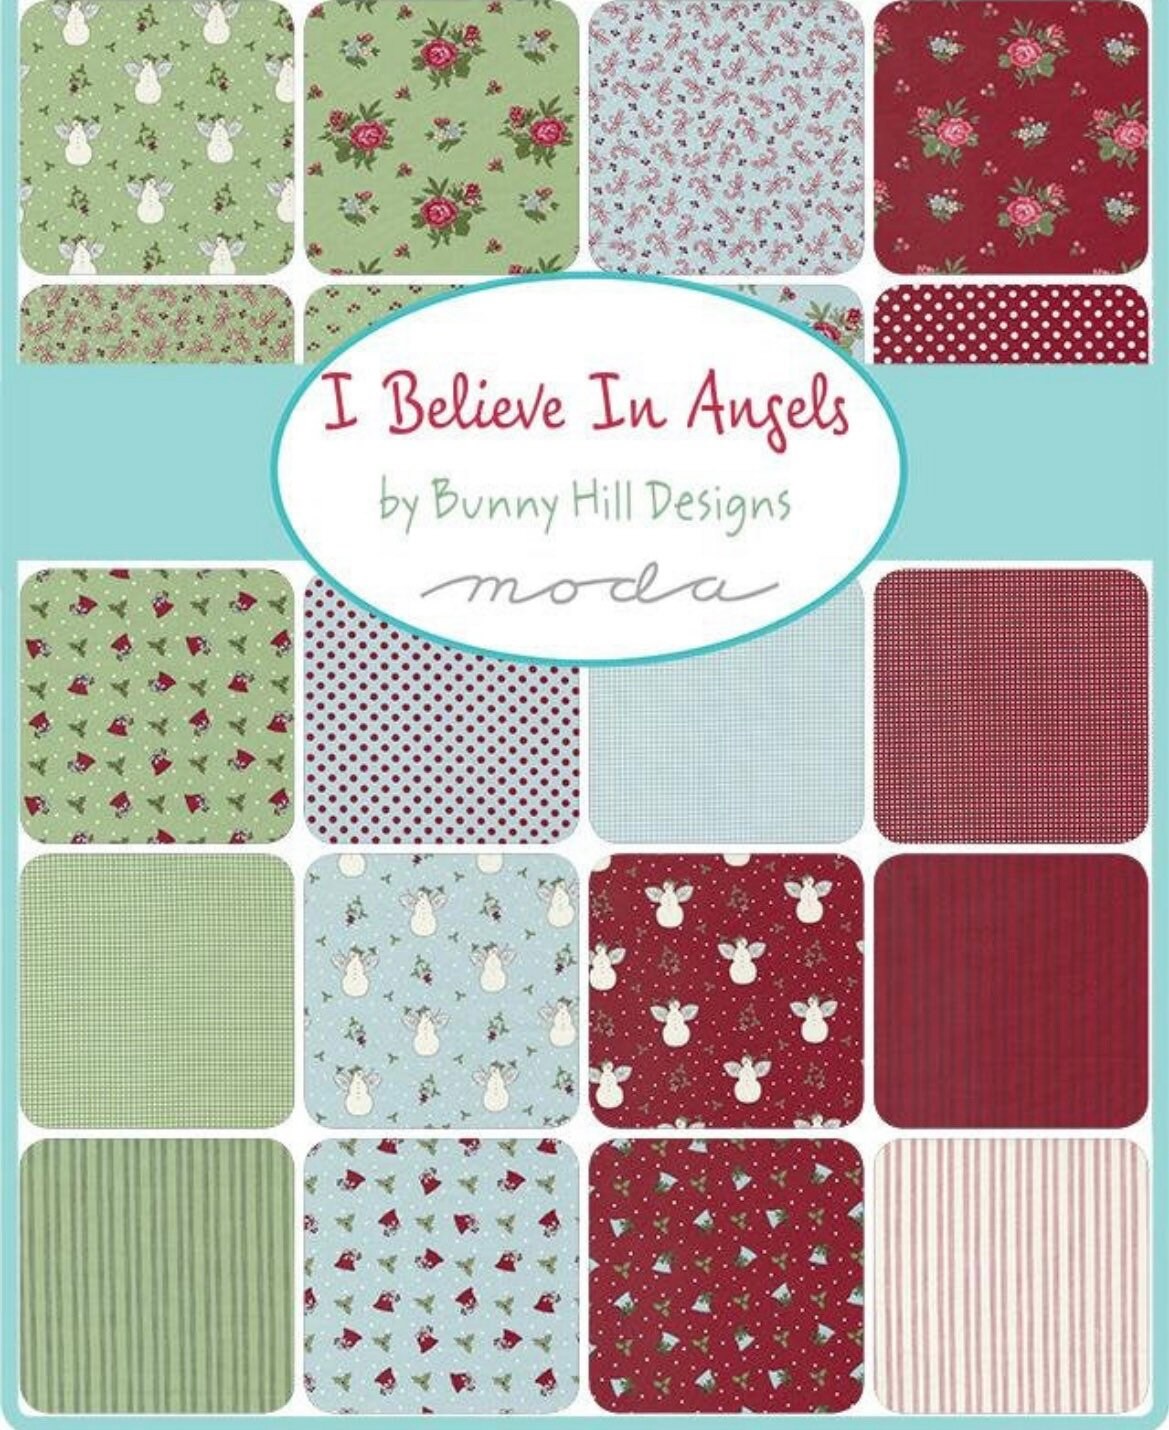 I Believe In Angels Fat Quarter Bundle - by Bunny Hill Designs for Moda